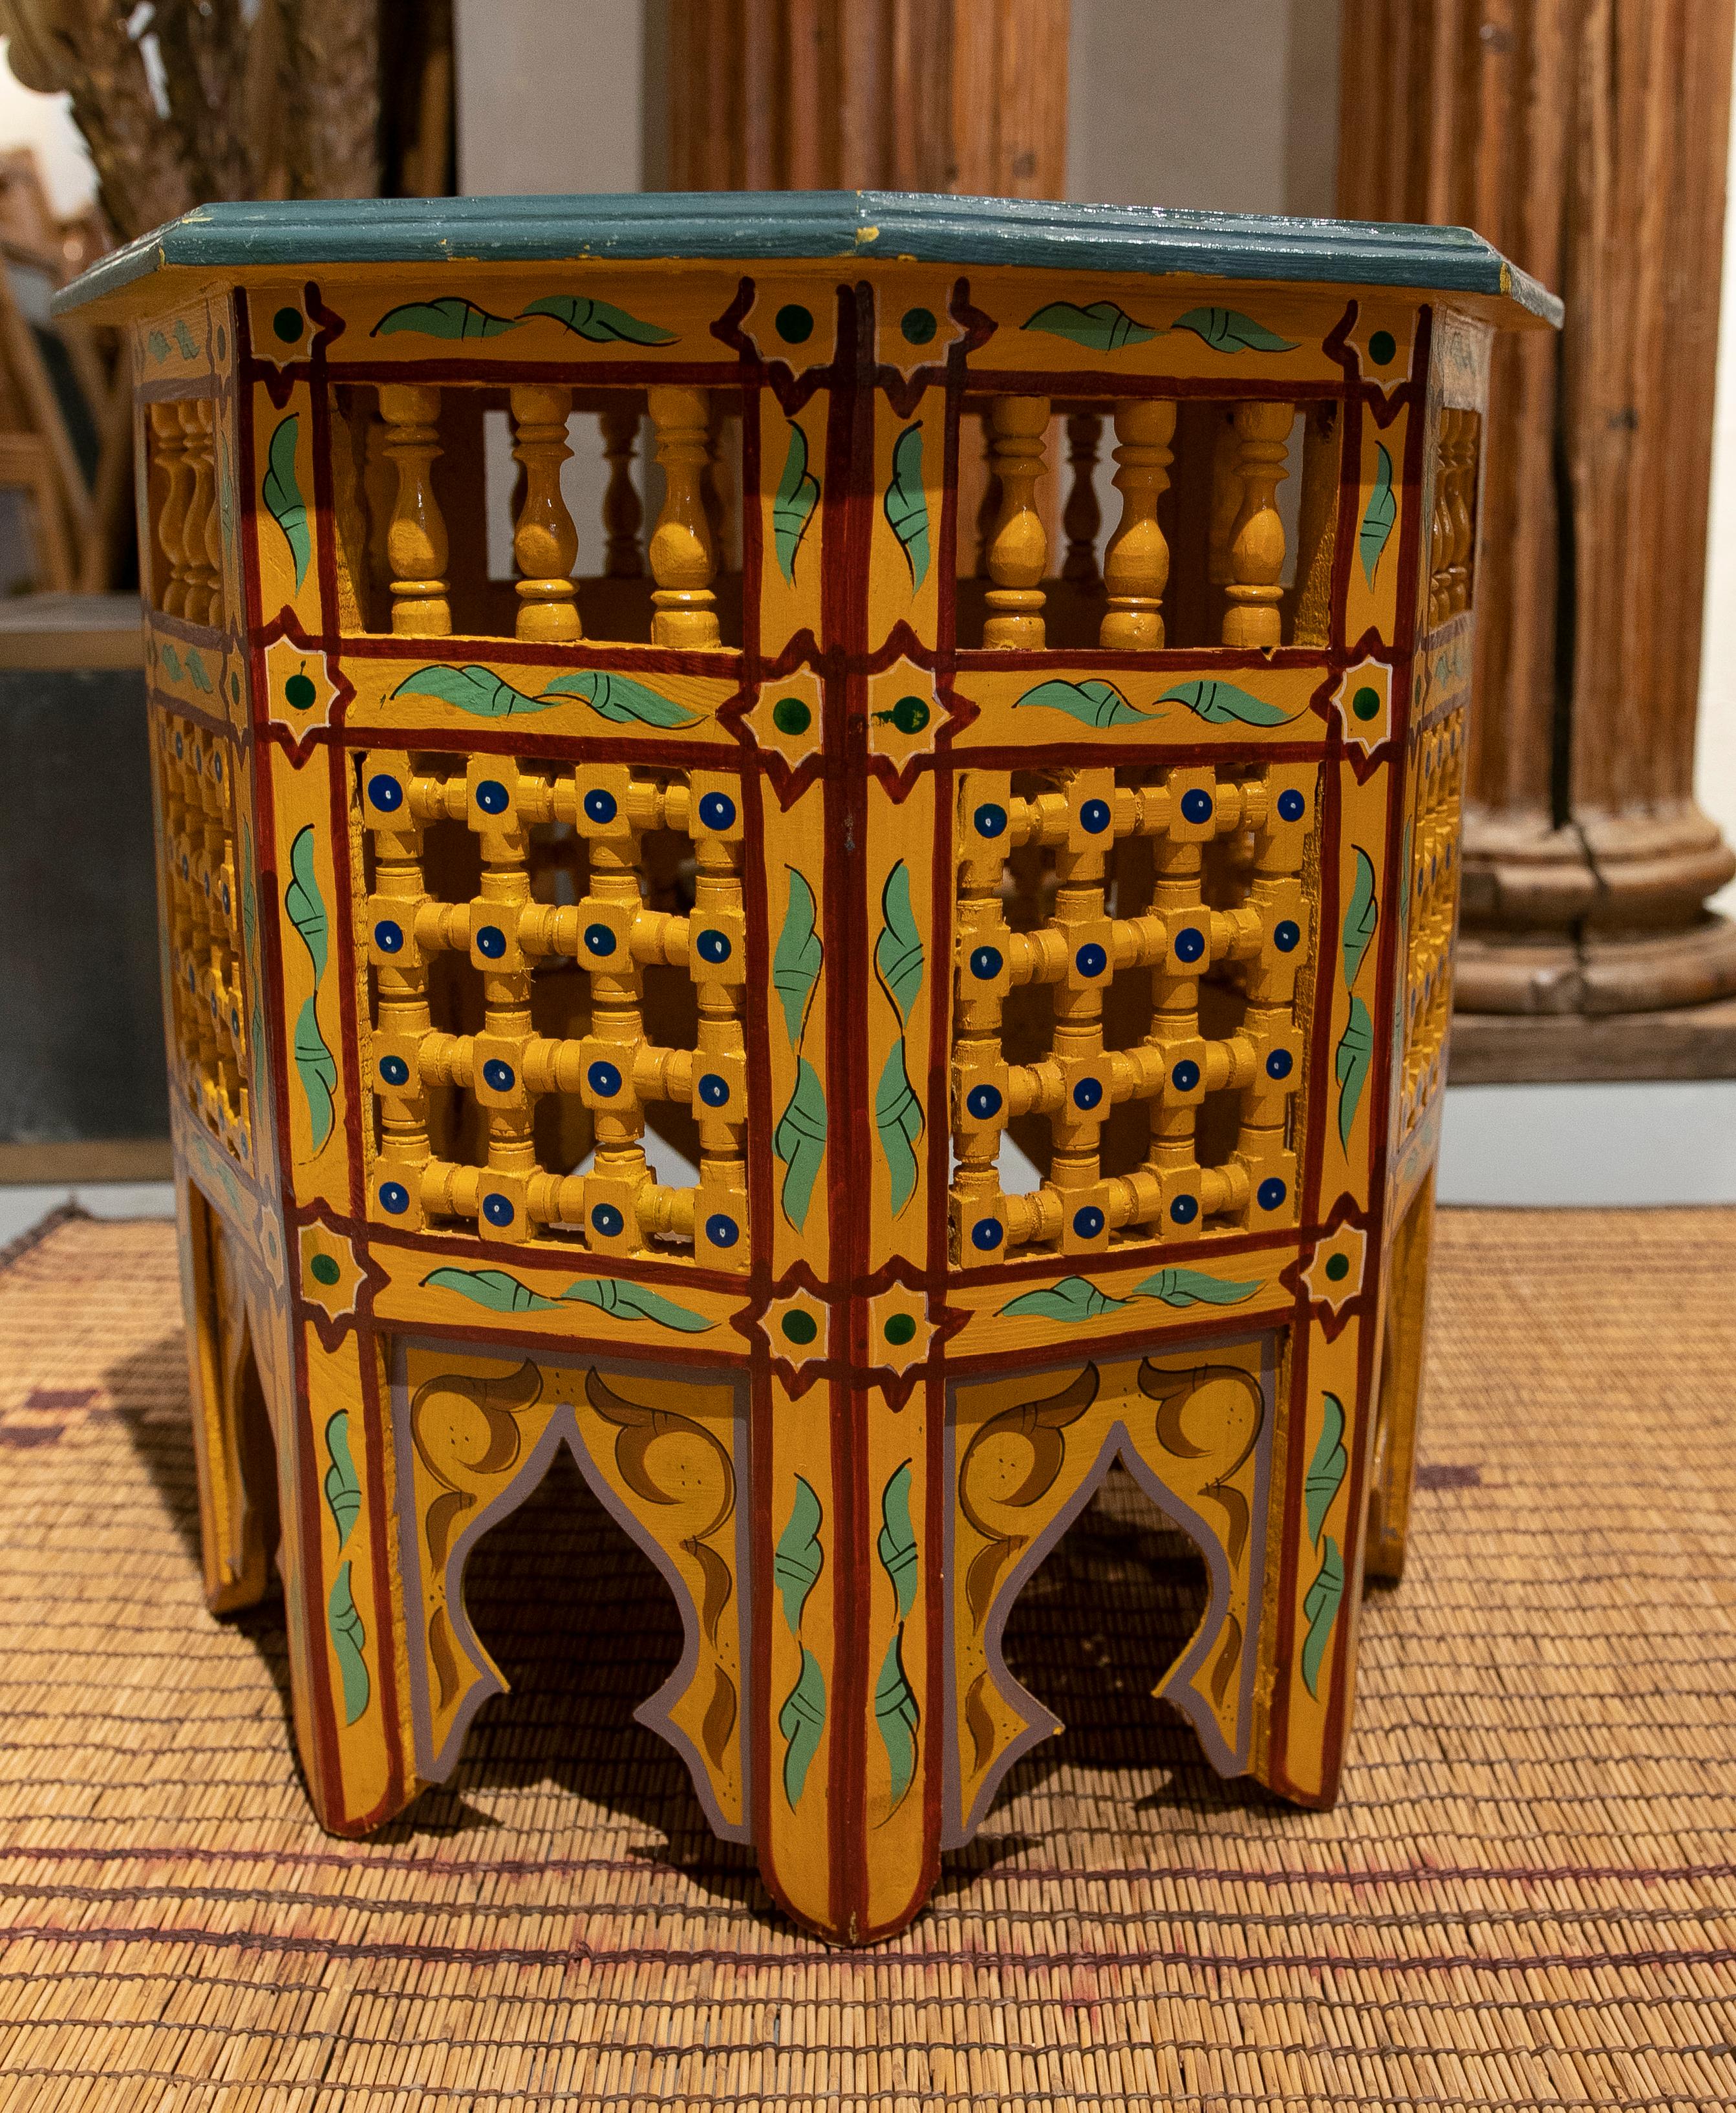 Octagonal wooden sidetable handpainted in yellow and green 12